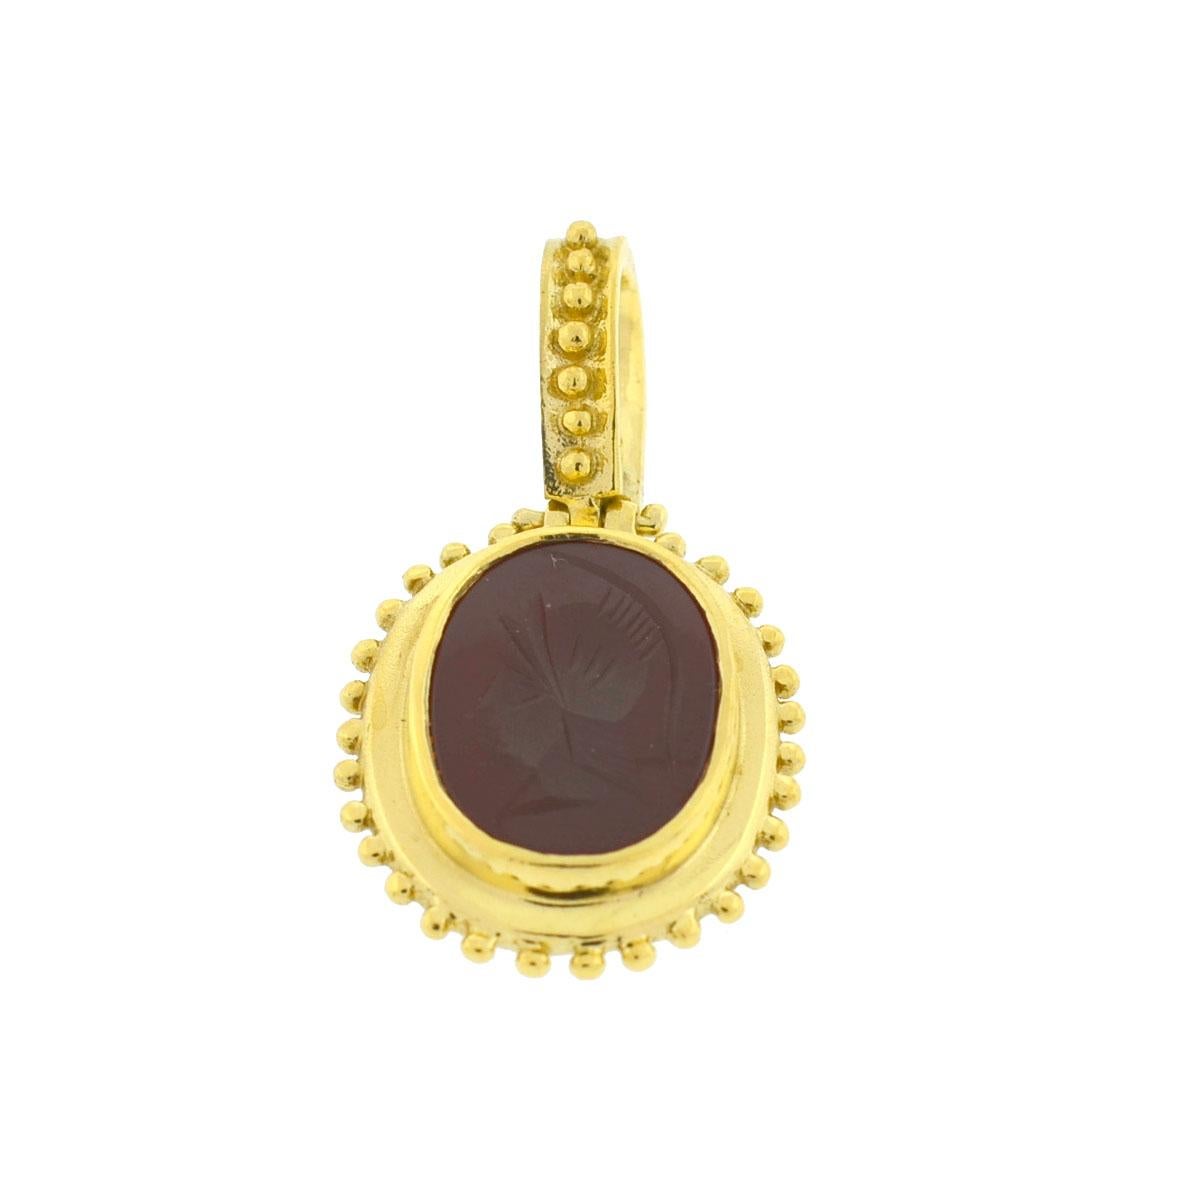 Company-N/A
Style-Double Sided Green Intaglio and Carnelian Cabochon Pendant 
Metal-18k Yellow Gold 
Size-1.38